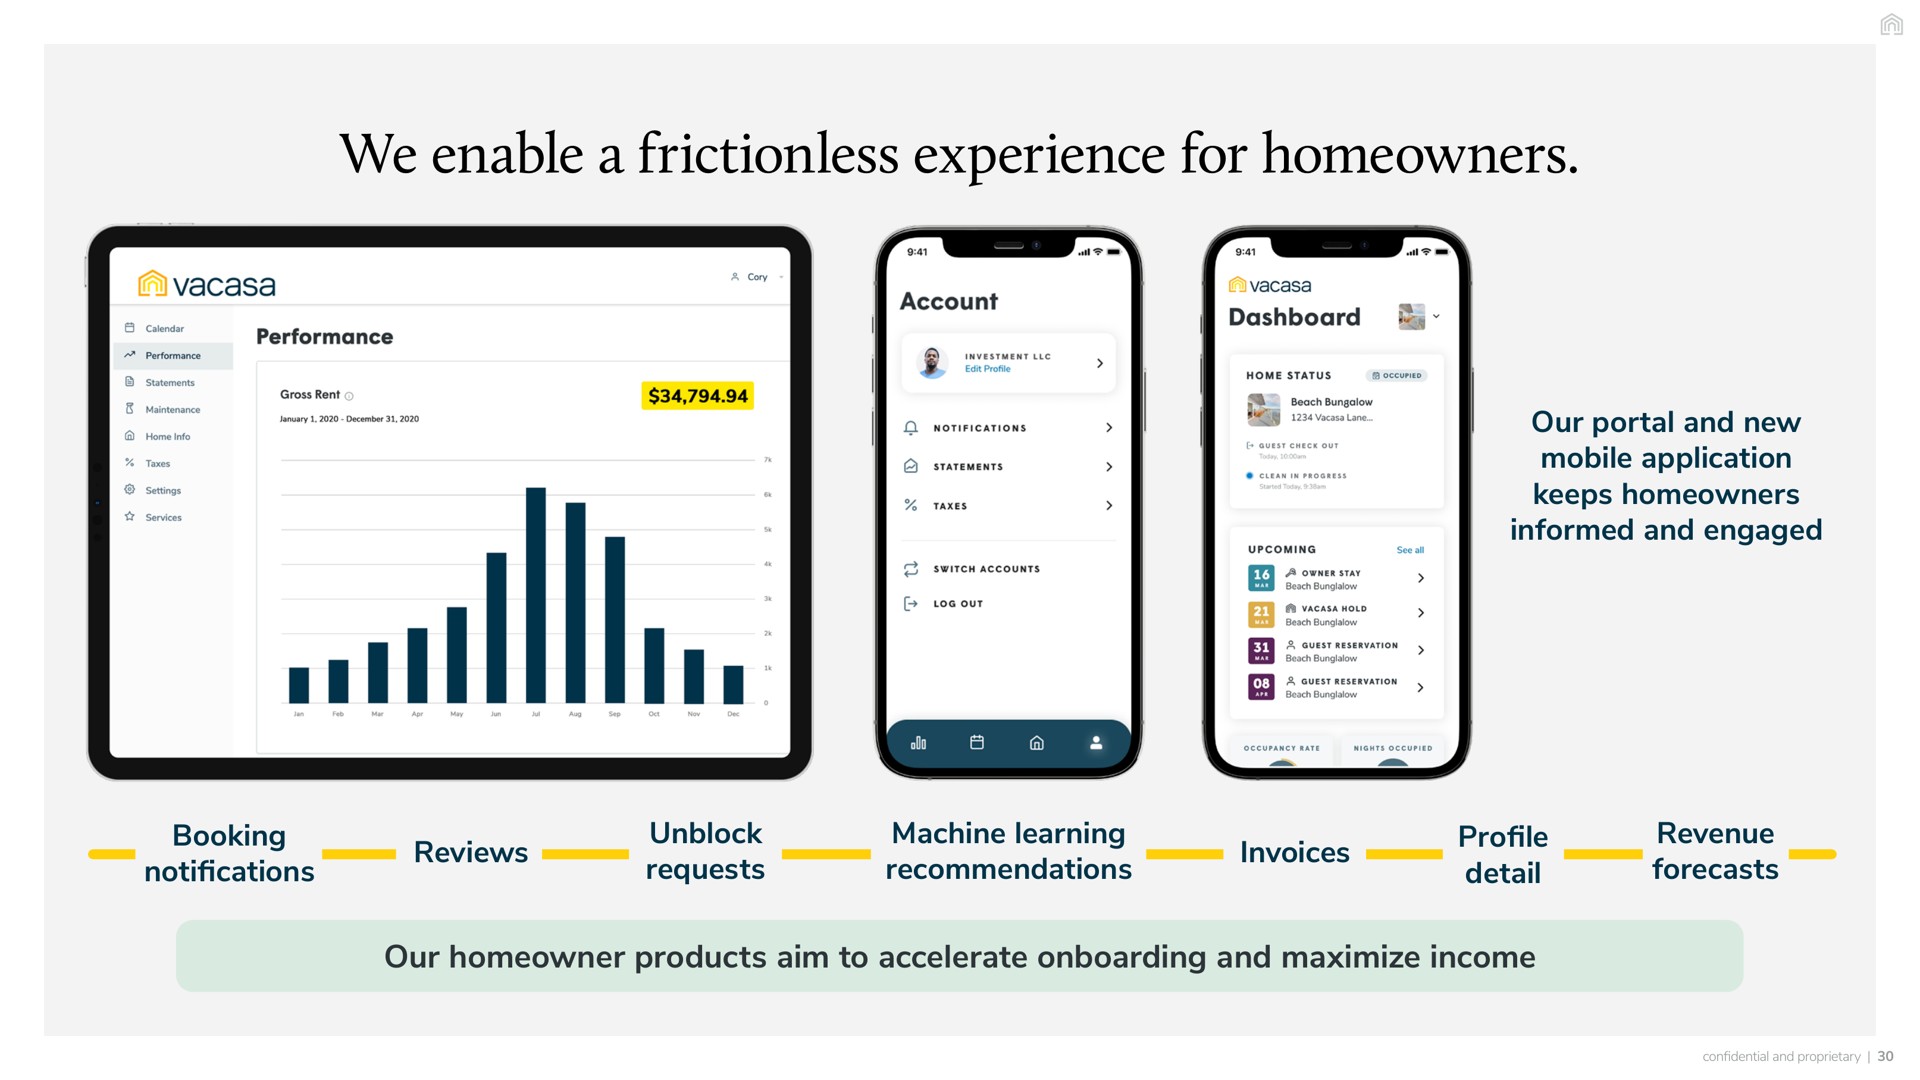 we enable a frictionless experience for homeowners beach bungalow scares dashboard performance account investment dit profile notifications owner star switch accounts home status gross rent upcoming see all our portal and new mobile application keeps informed and engaged booking tae notifications reviews unblock requests machine learning recommendations invoices profile detail revenue forecasts our homeowner products aim to accelerate and maximize income | Vacasa